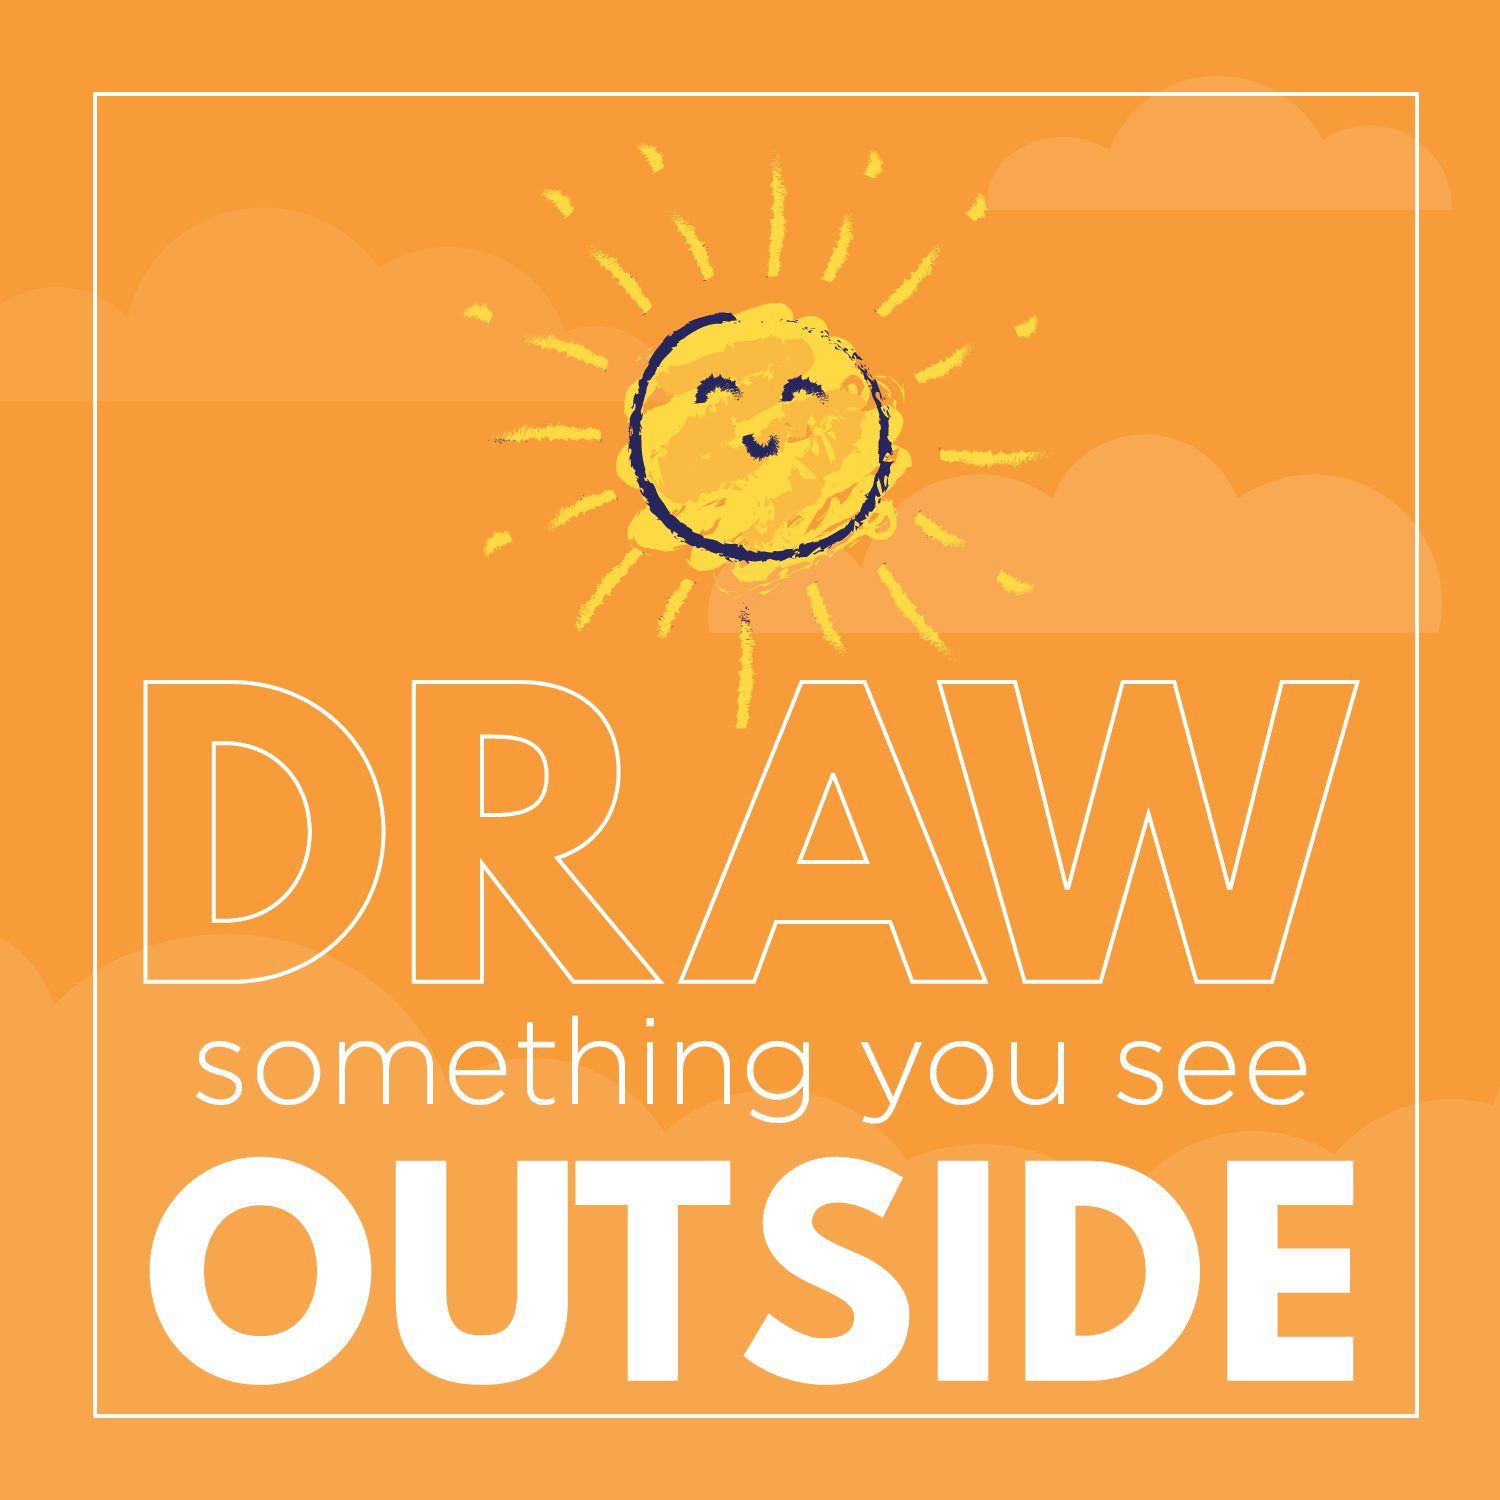 Draw something you see outside